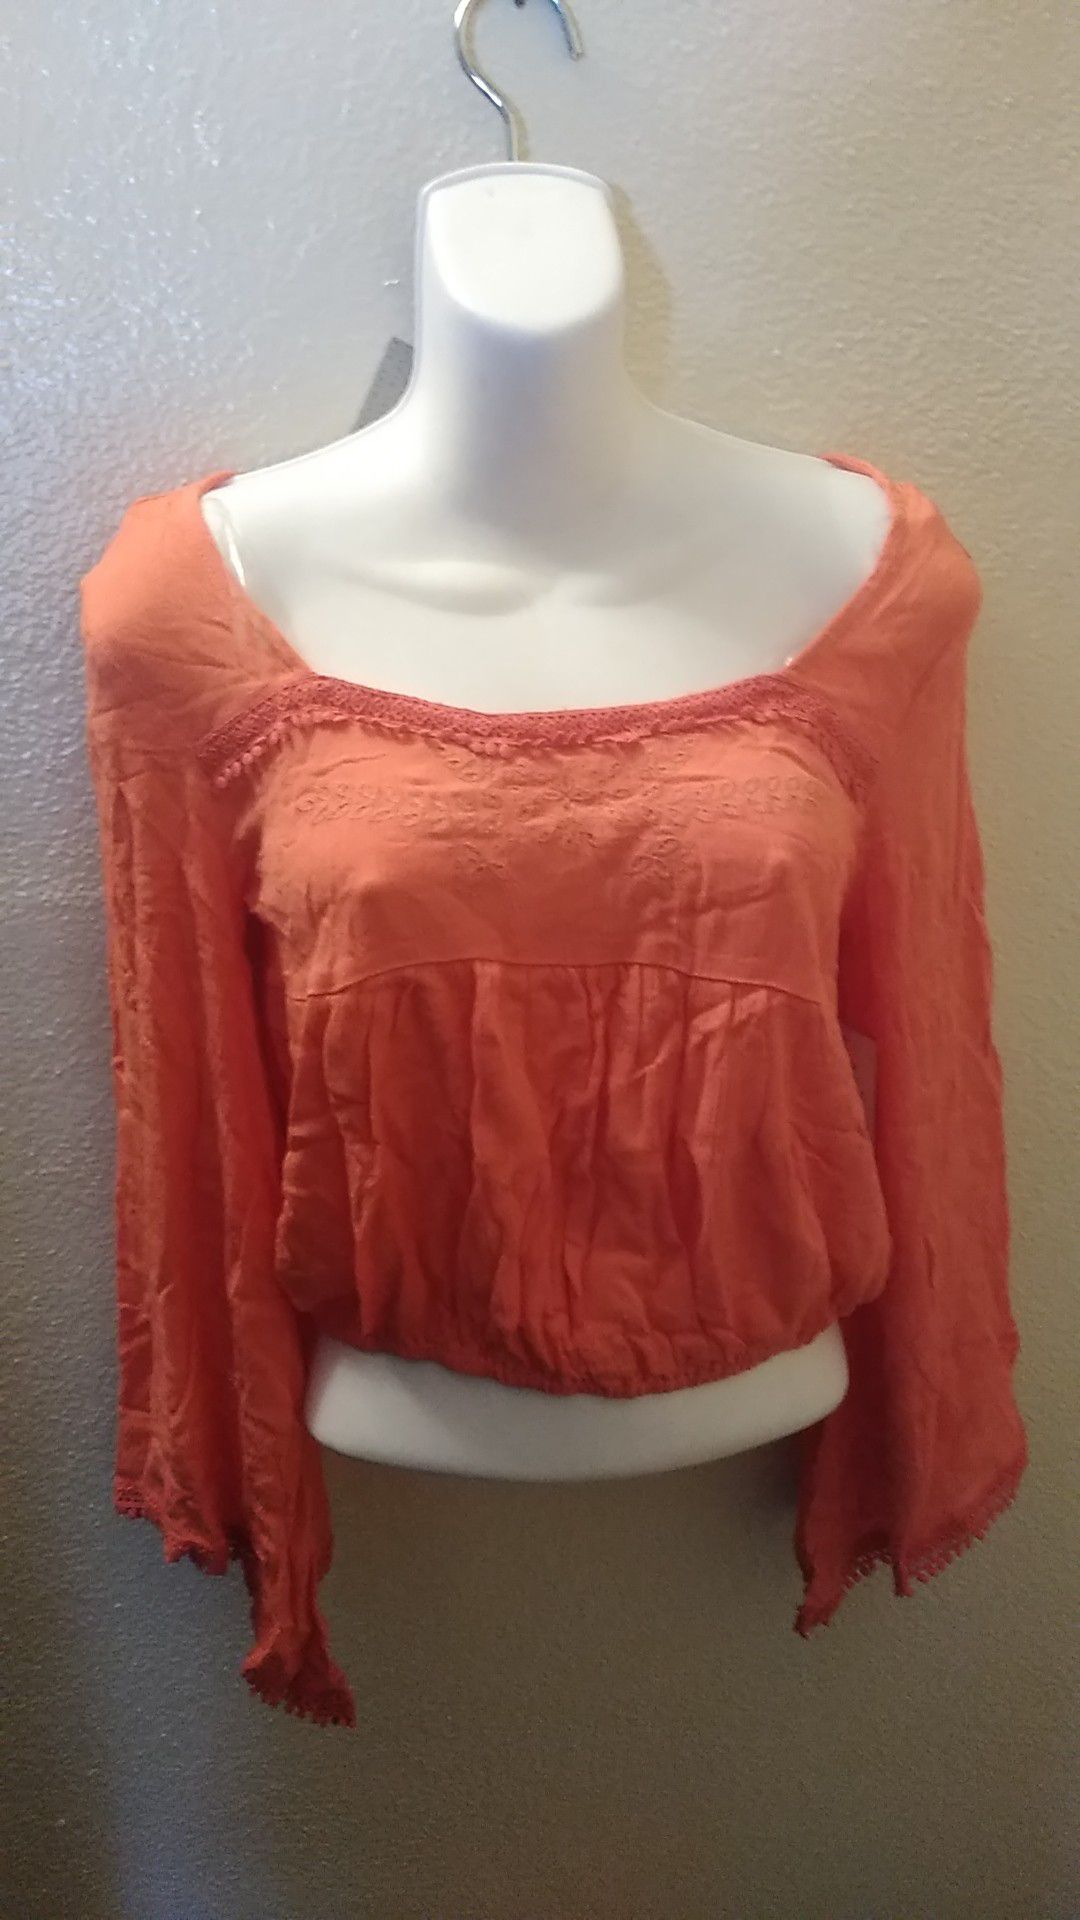 New for women's size Small and Medium